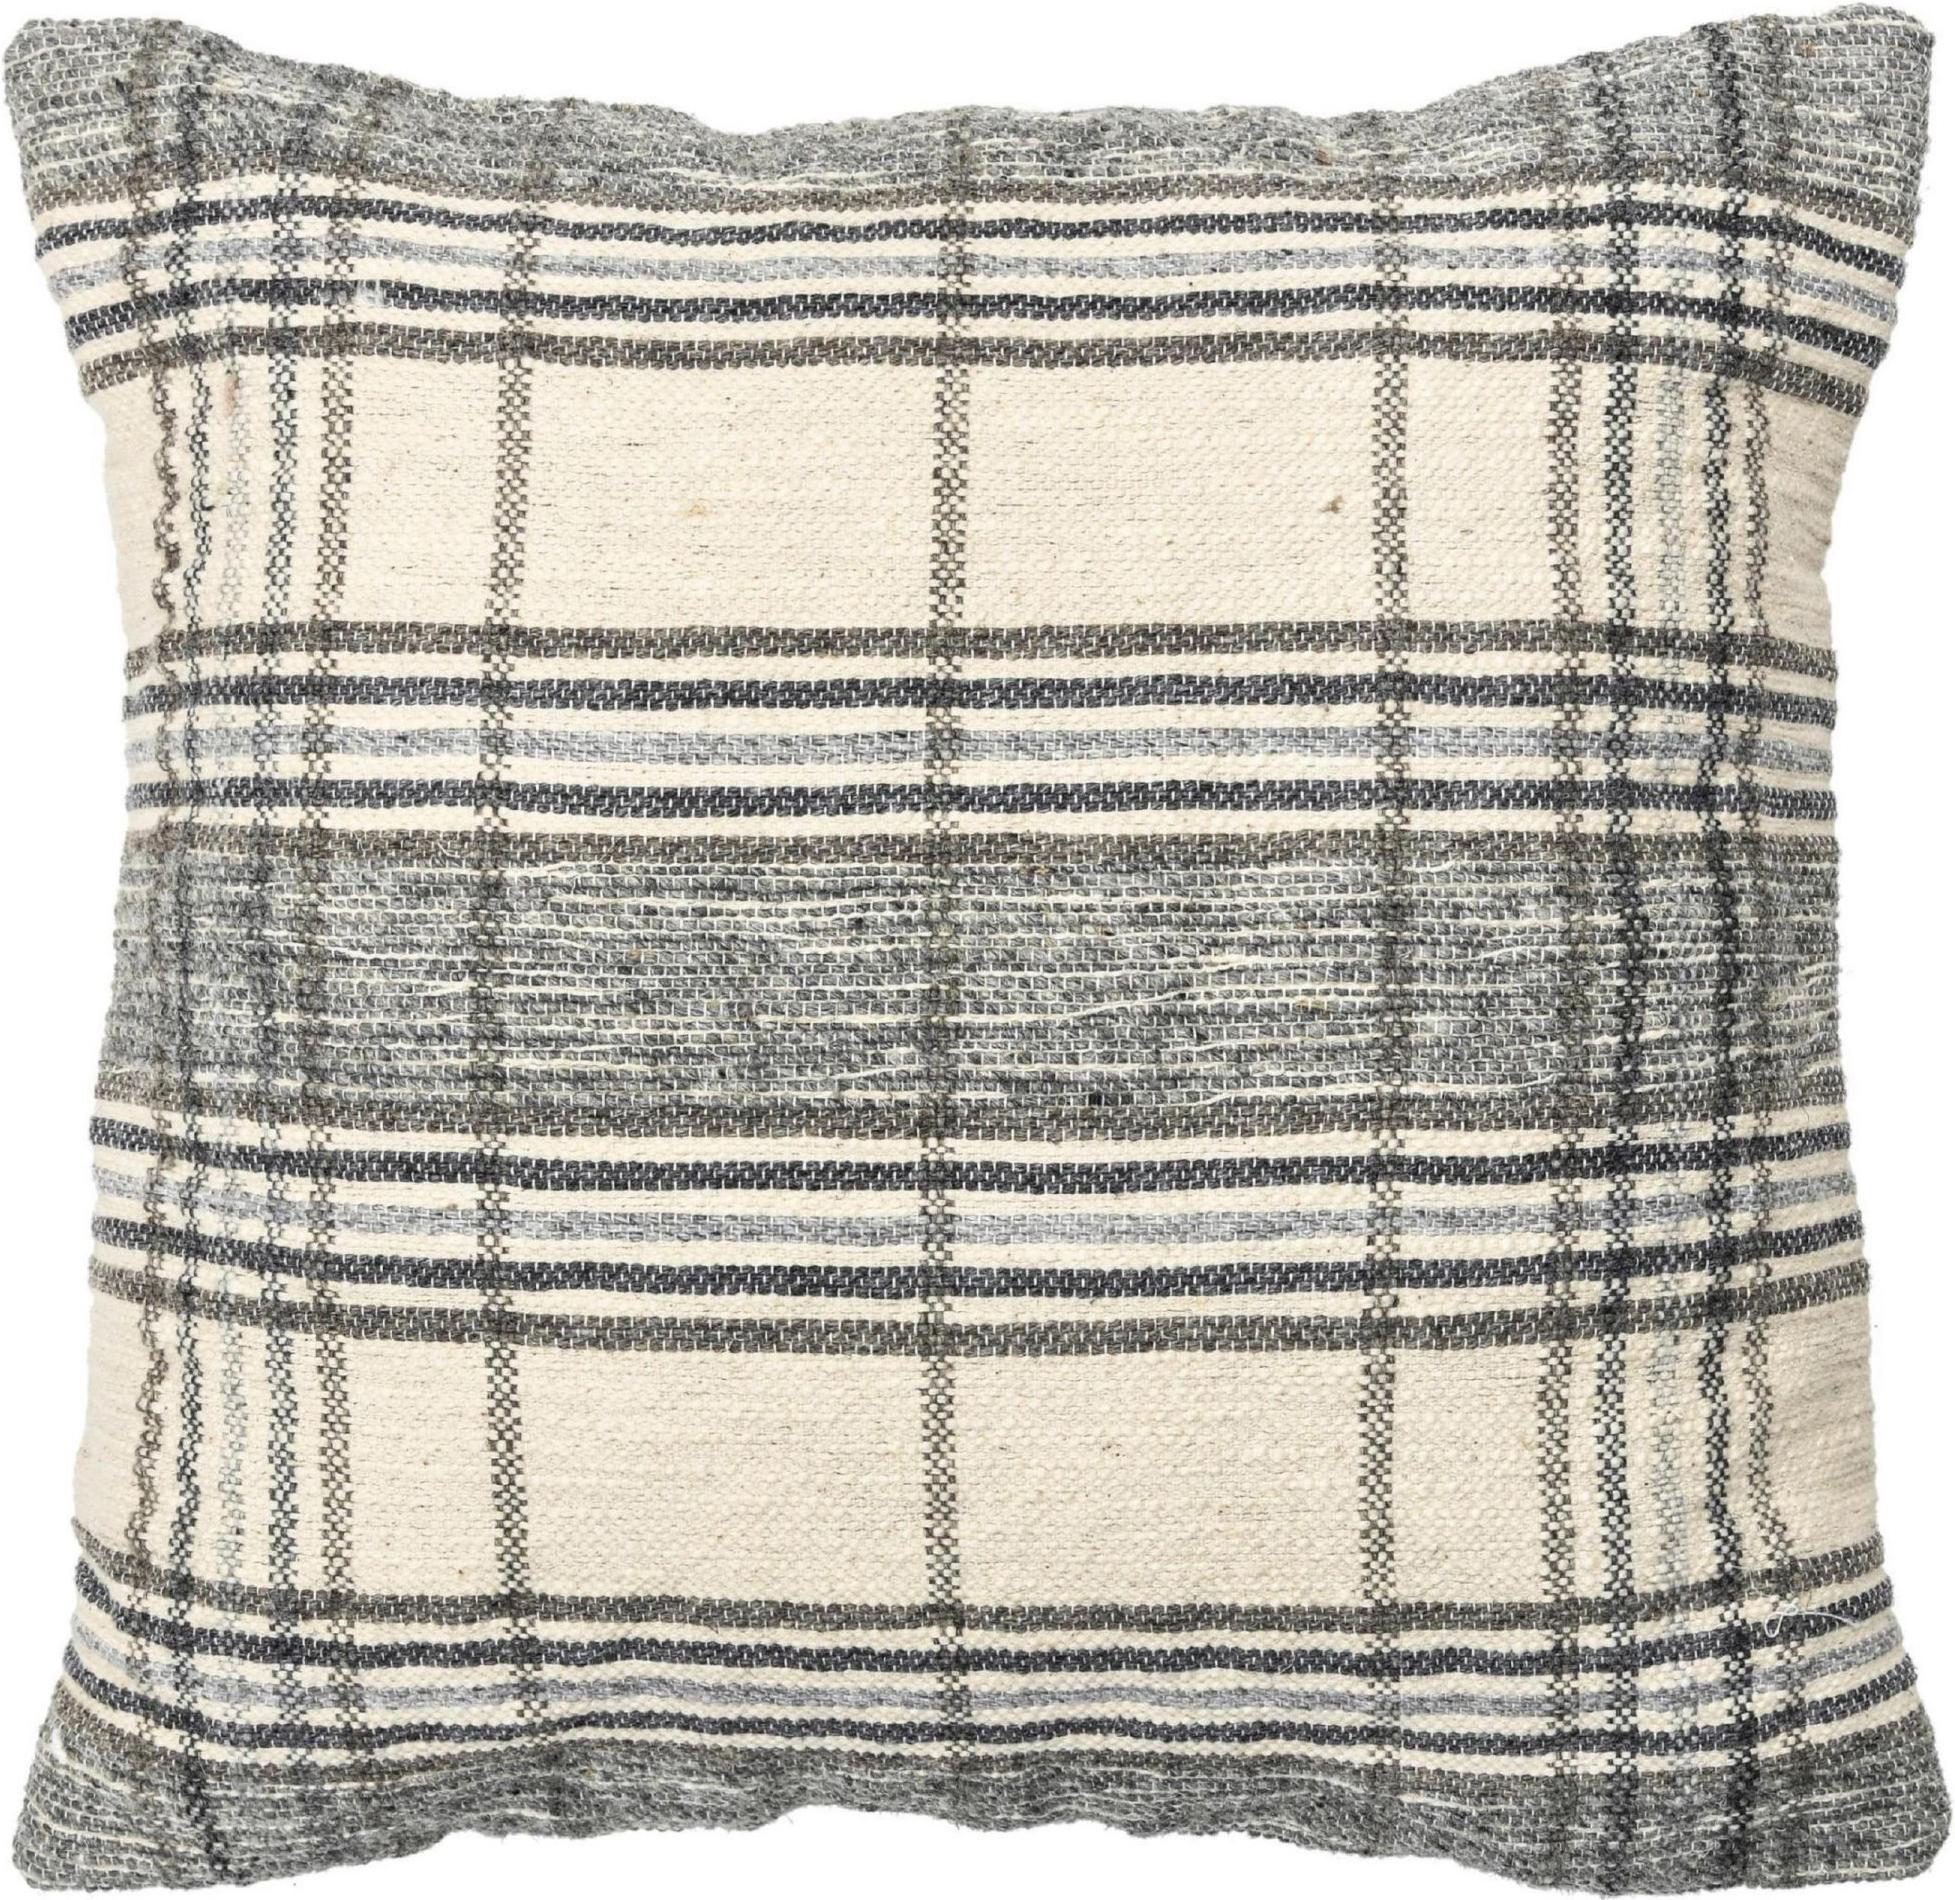 Elevate your home's look with a chic Modern Wool and Cotton Pillow, meticulously handmade with opulent materials, in a 20